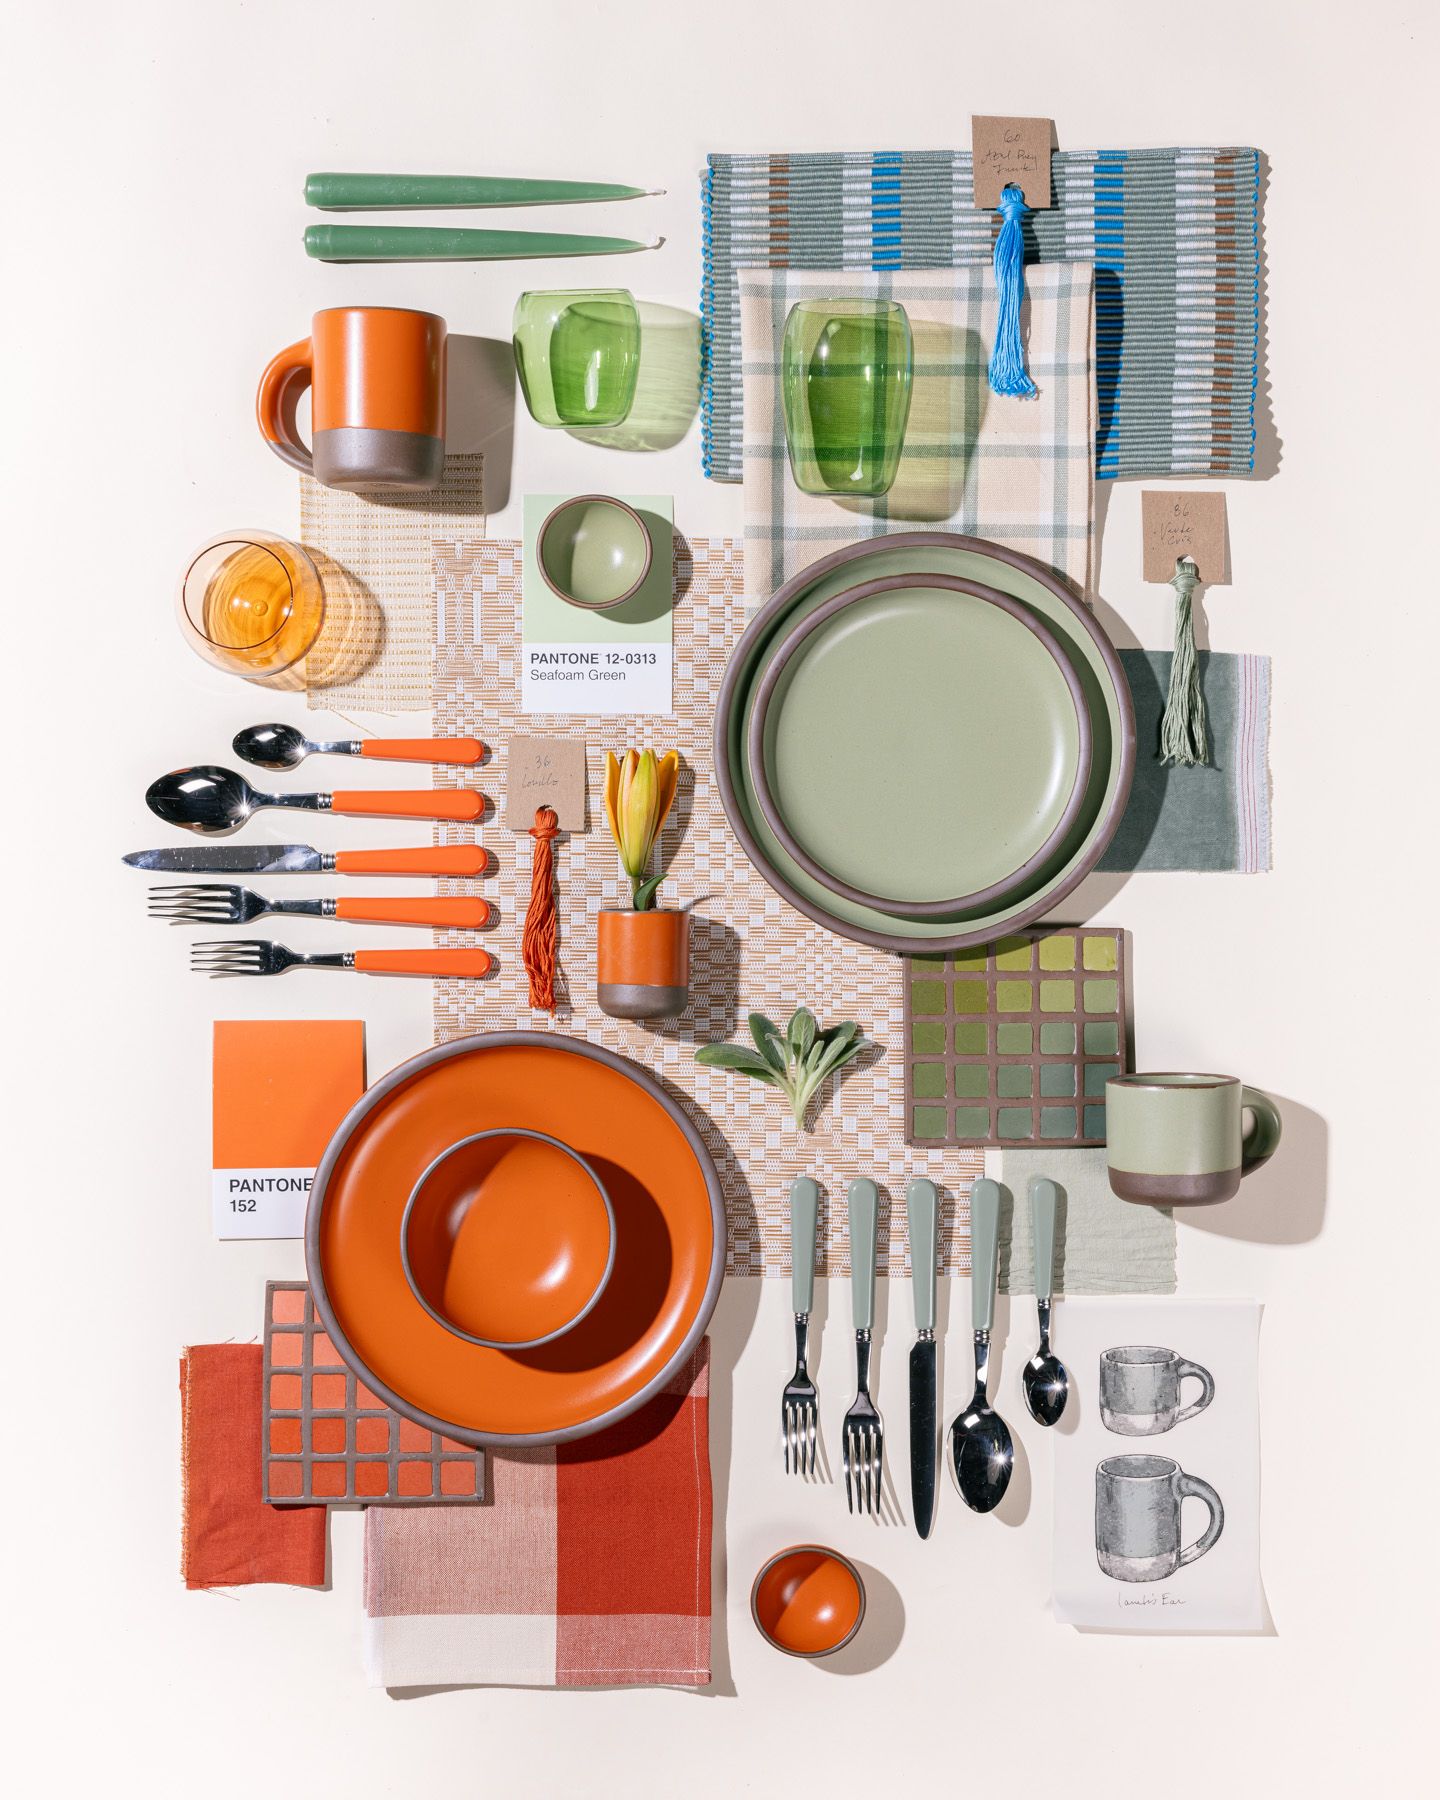 An overhead view of an artistic flat lay of ceramic plates in sage green and bold orange colors, surrounded by pantone cards, textile samples, flatware, glassware all in matching colors.